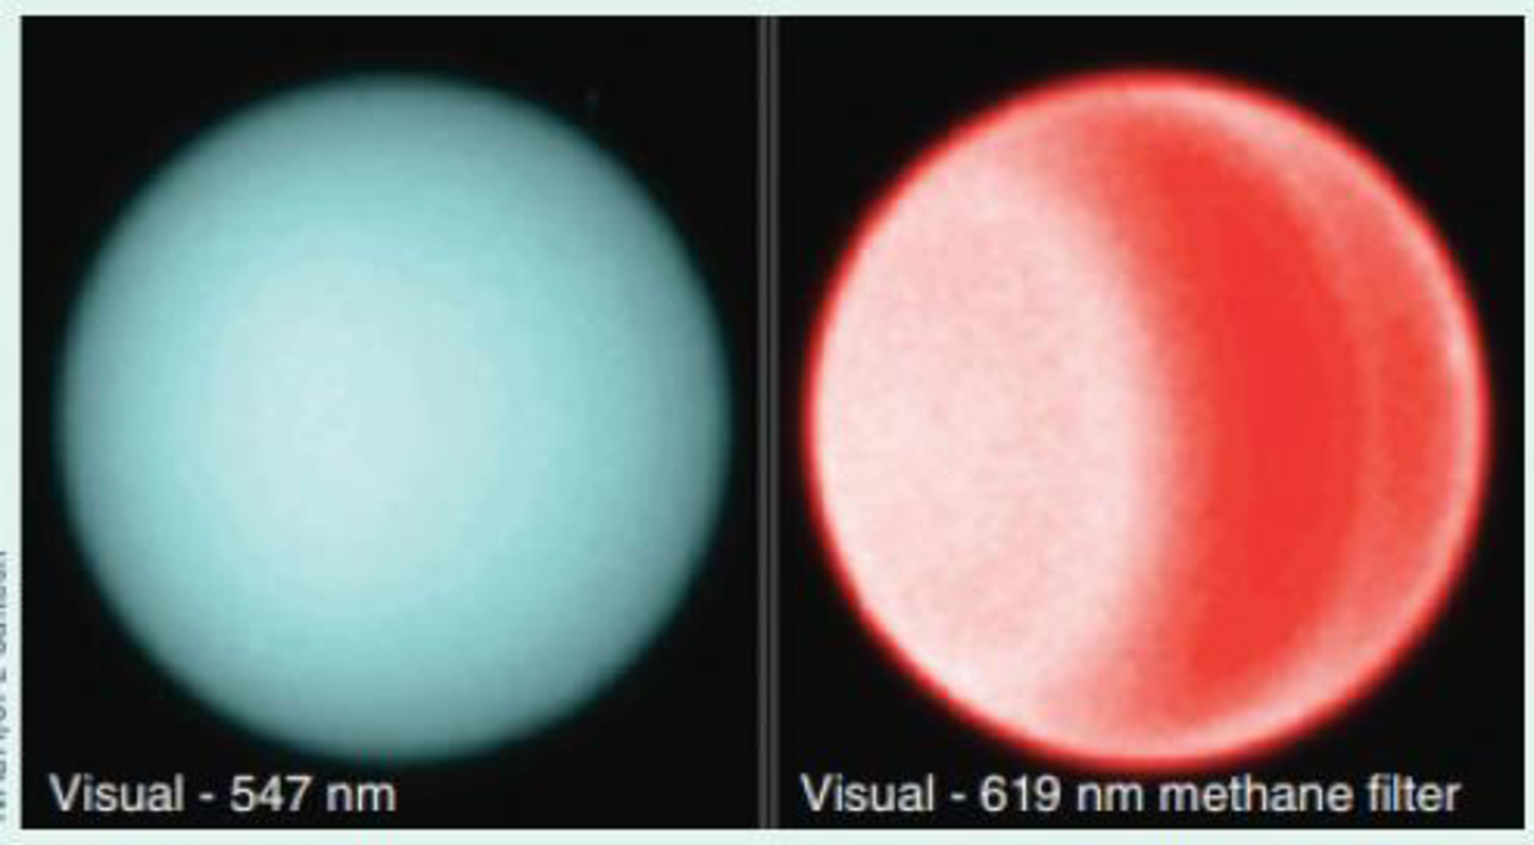 Chapter 24, Problem 6LTL, The image to the left shows how Uranus would look to the unaided human eye, whereas the right image 